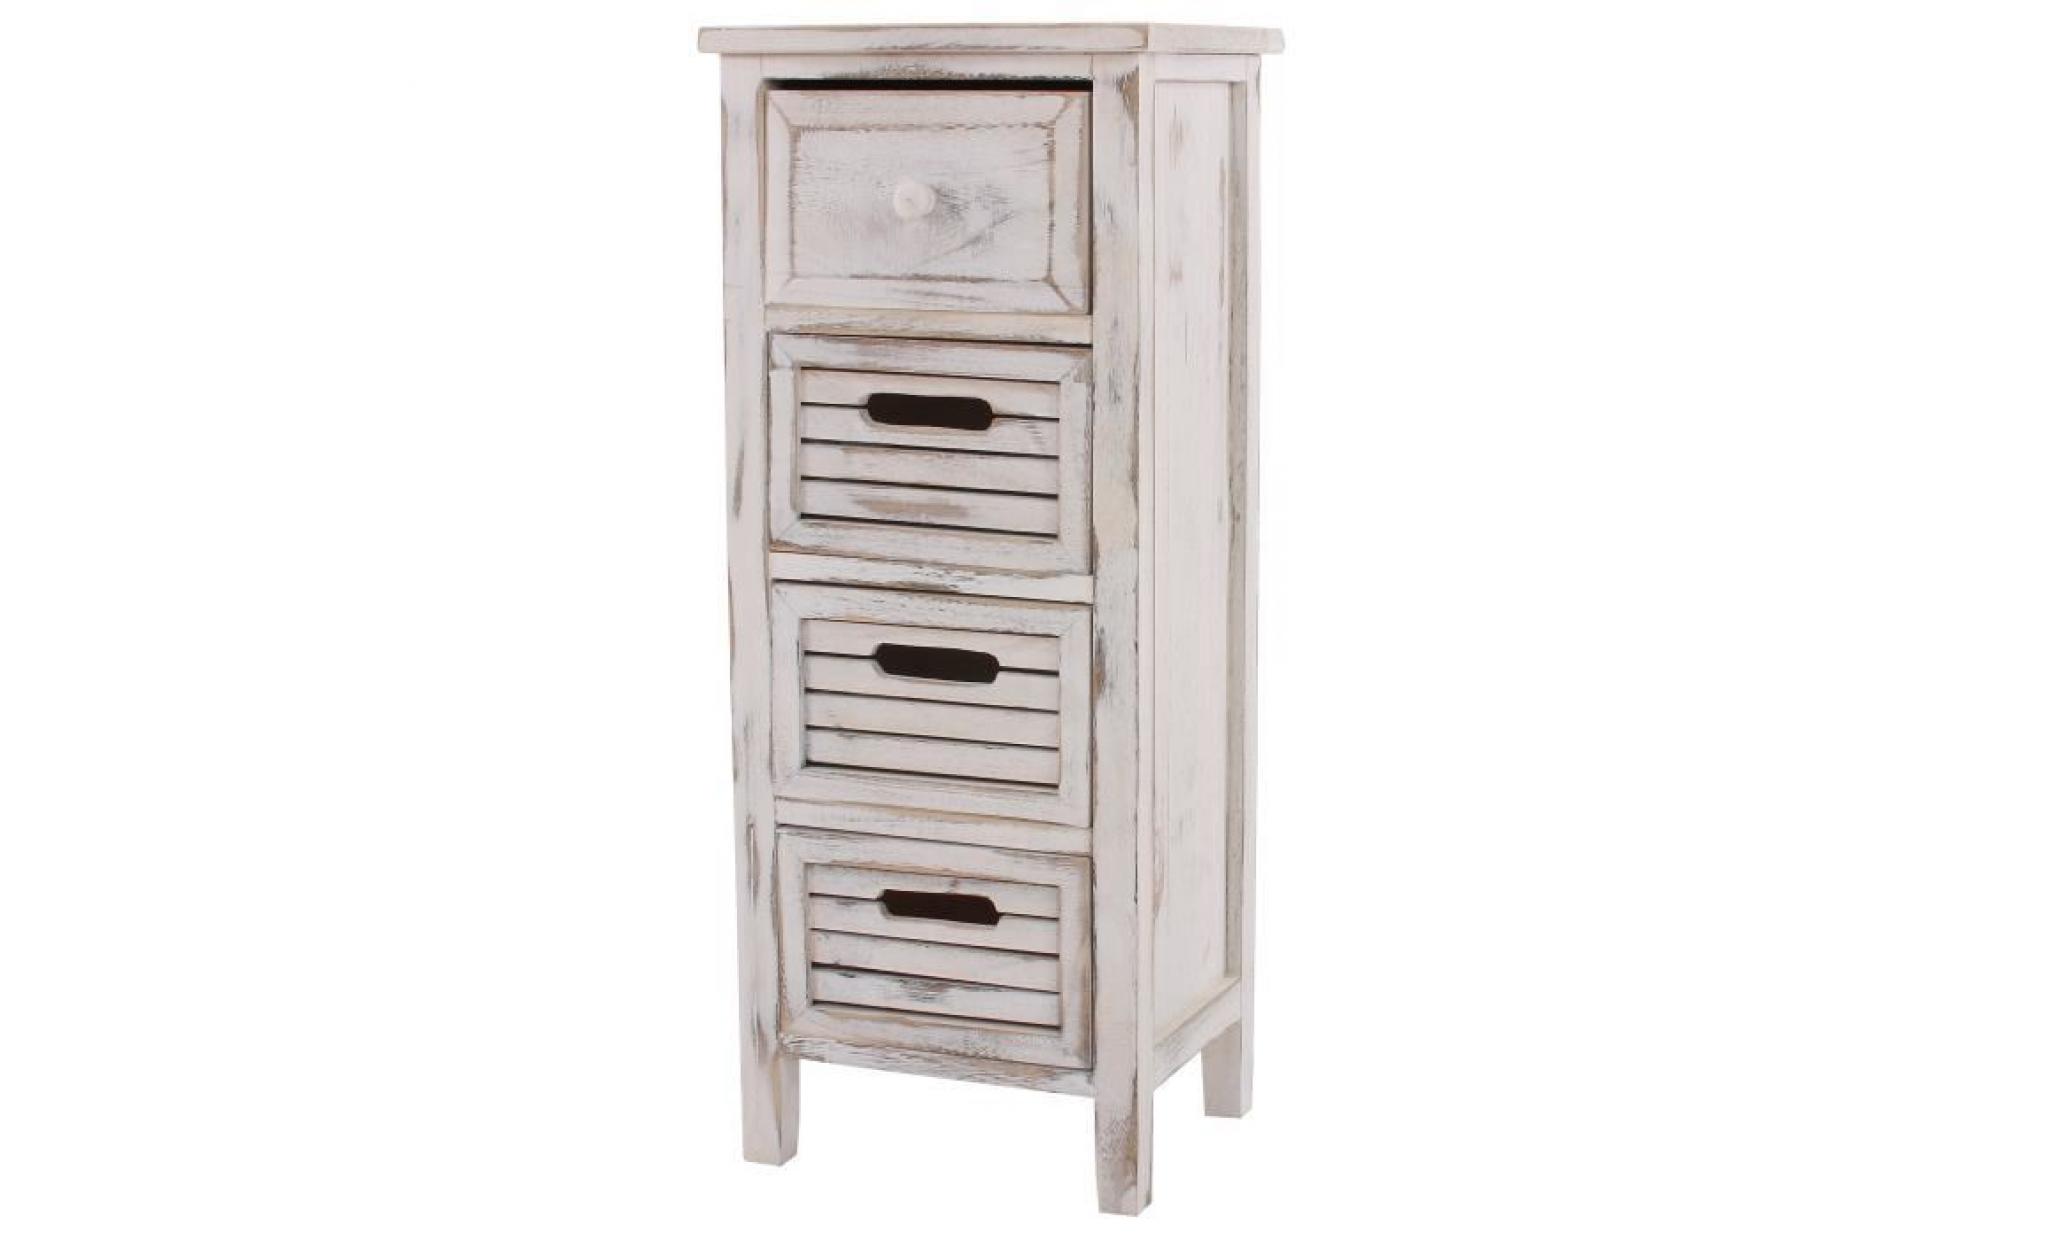 commode / table d'appoint / armoire, 4 tiroirs, 30x25x74cm, shabby, vintage, gris